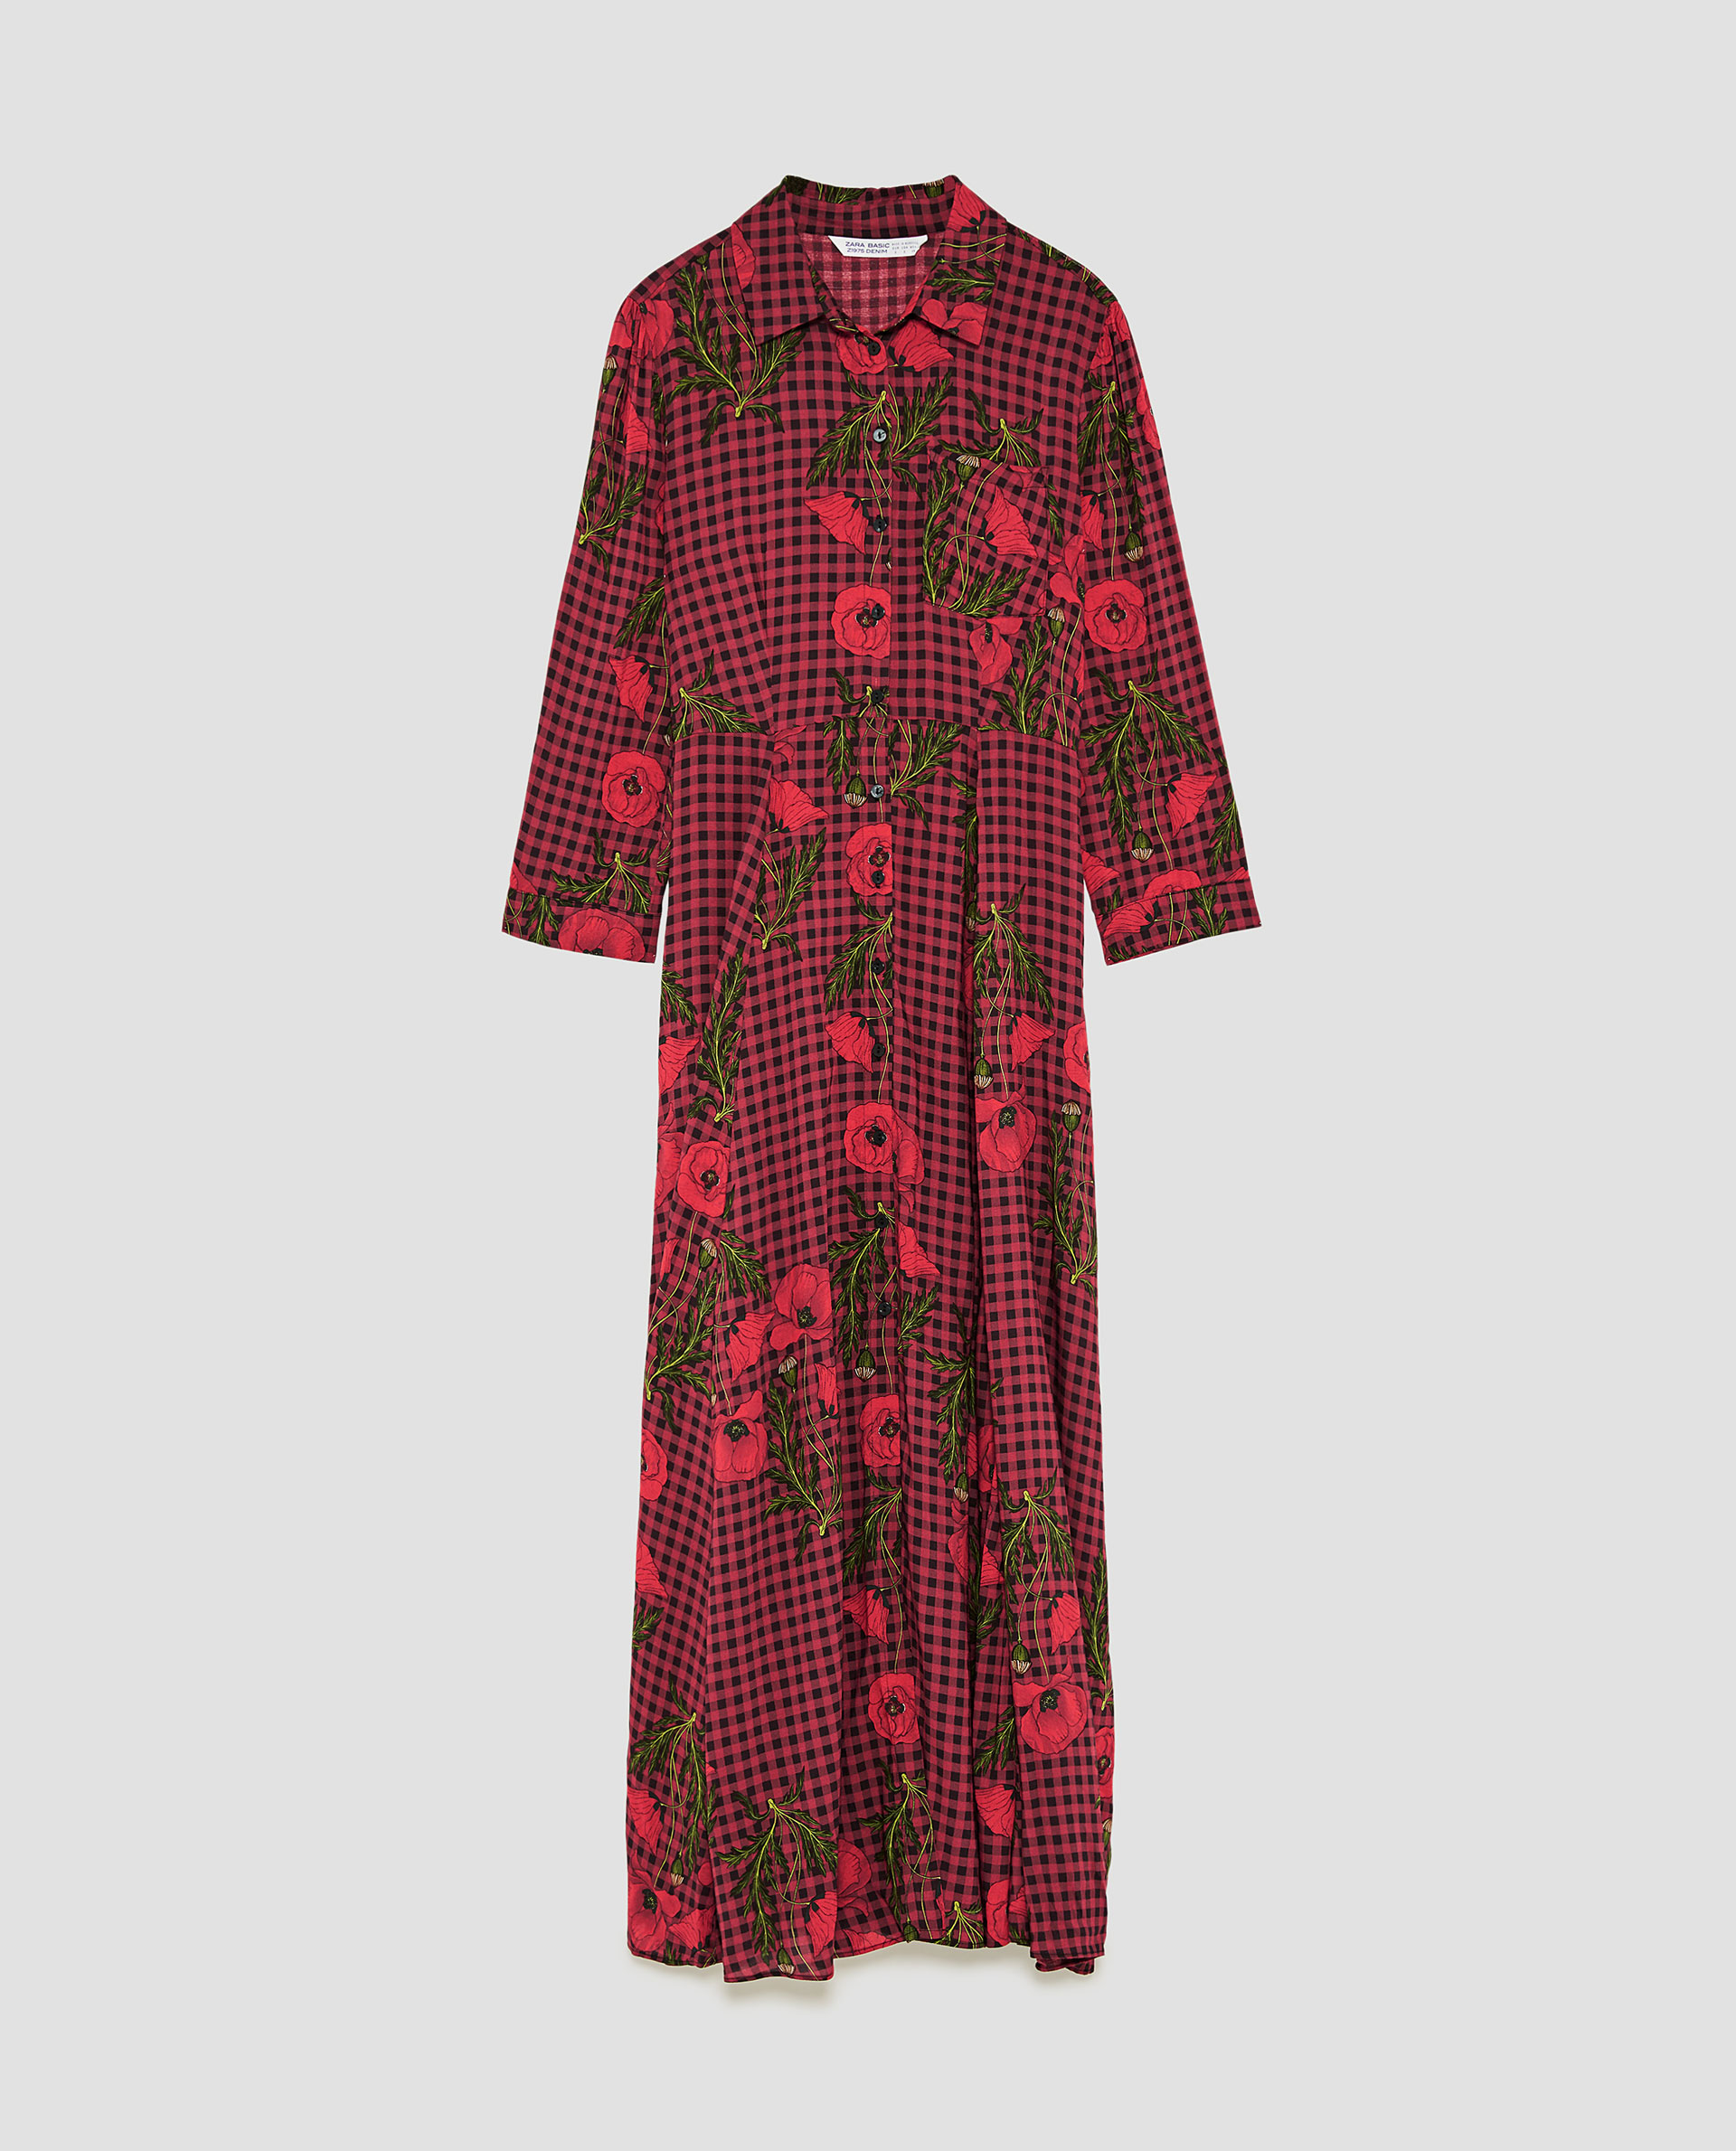 Zara Long Printed Dress with Poppies